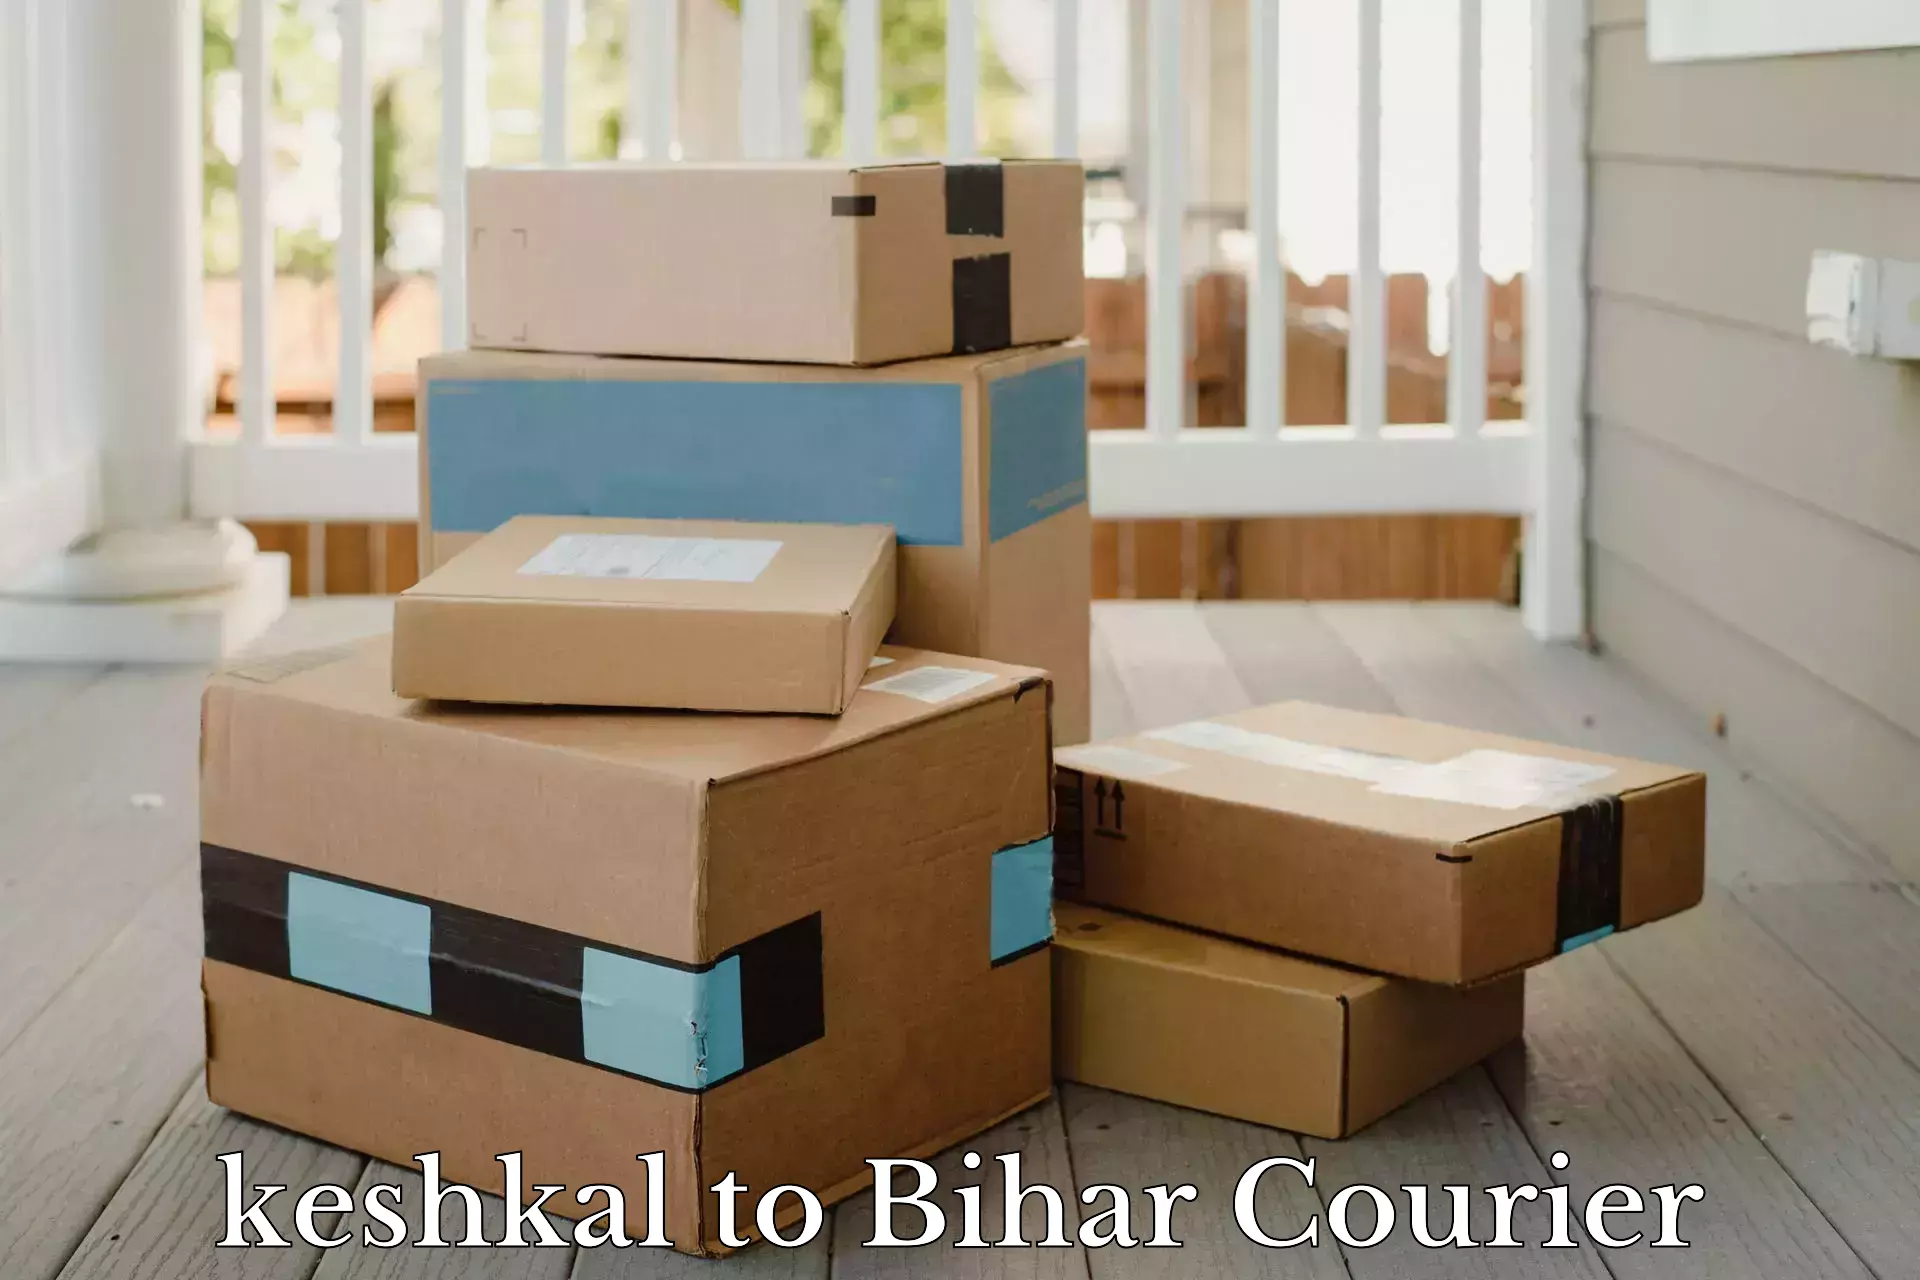 Small business couriers in keshkal to Bihar